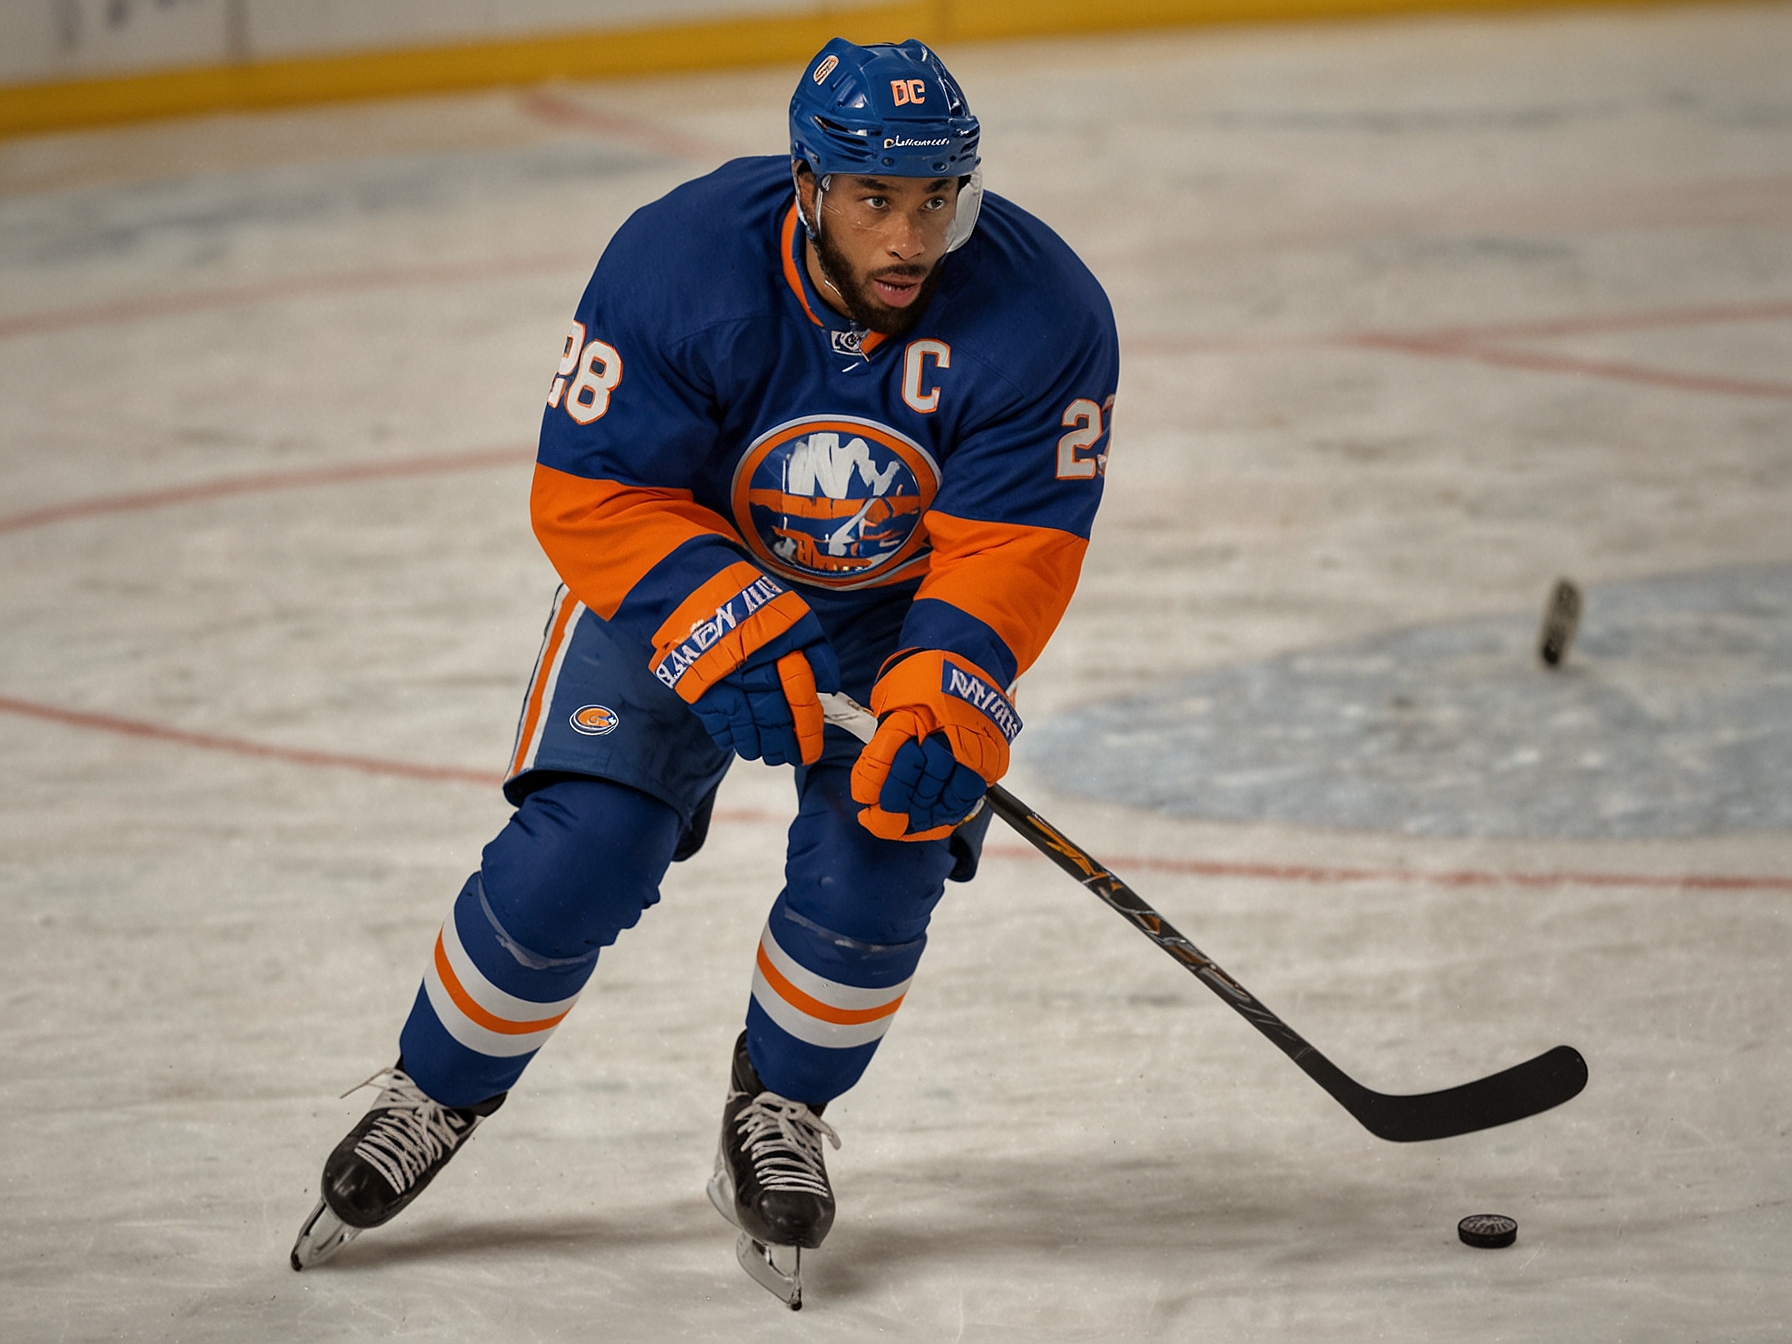 Anthony Duclair, in his New York Islanders jersey, skating swiftly during a game. This image captures Duclair's speed and agility, highlighting his role in bolstering the Islanders' offensive lineup.